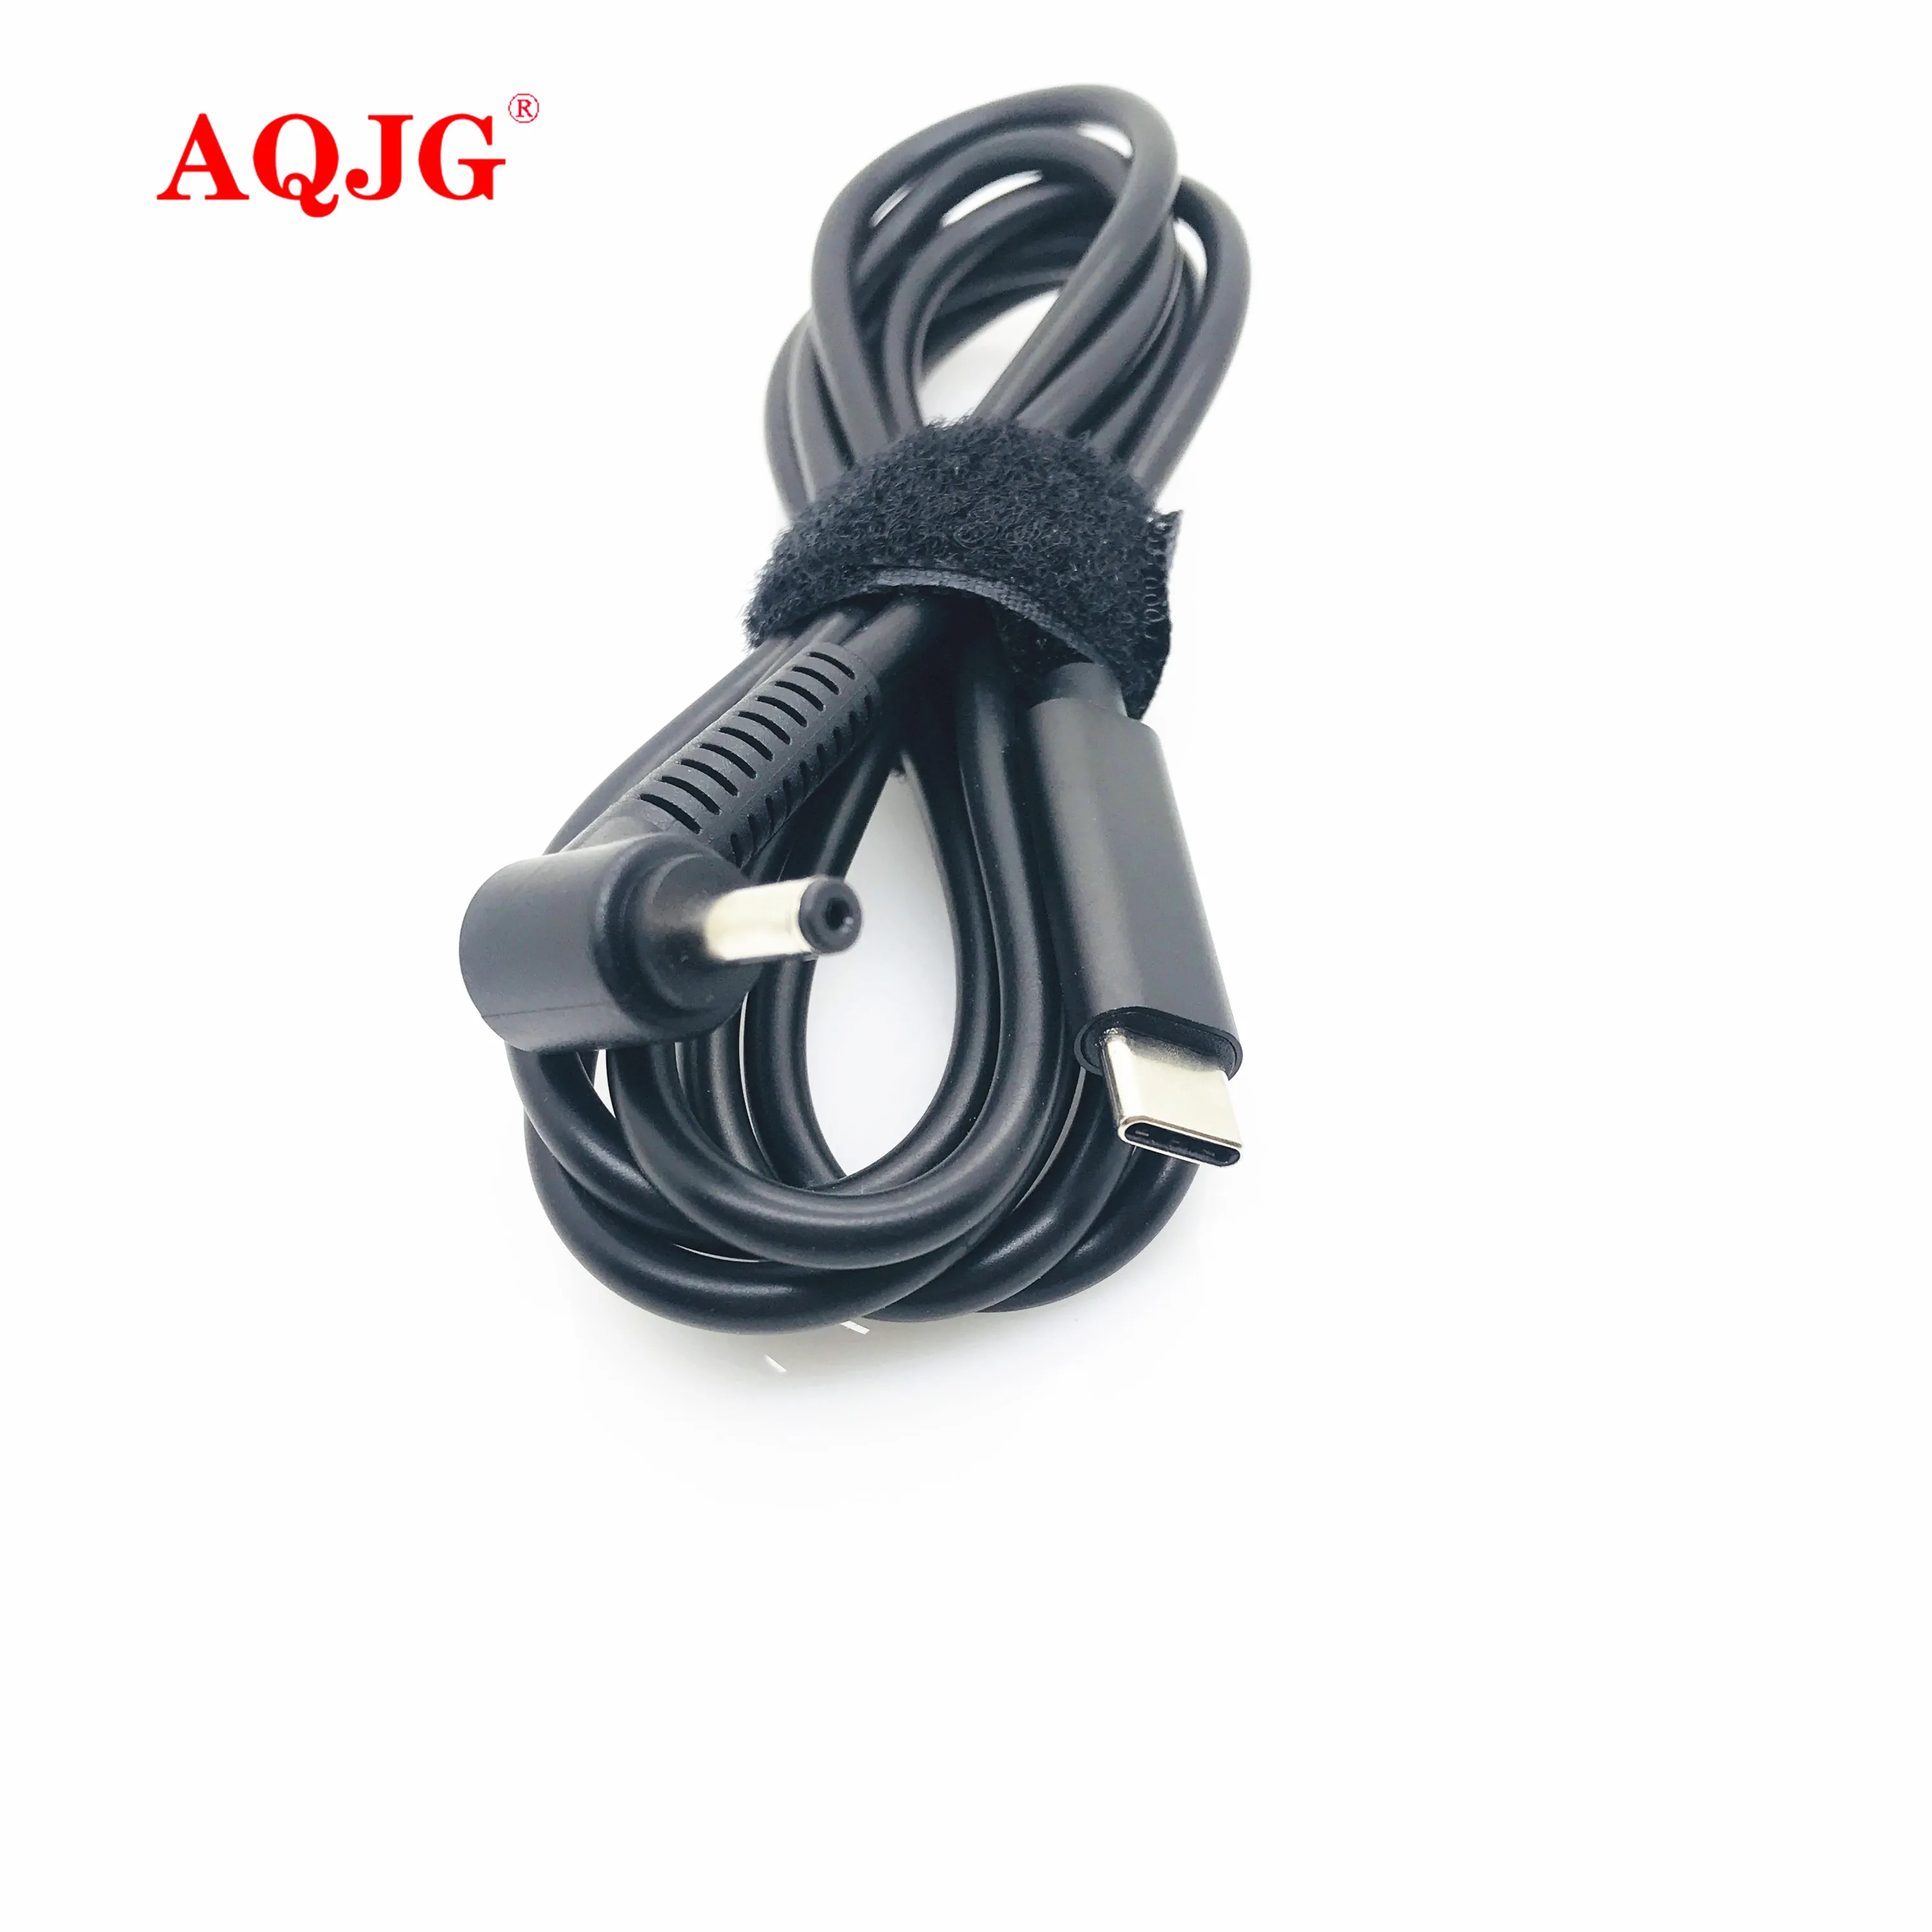 

USB Type C PD Charging Cable to 4.0*1.35mm for ASUS Zenbook UX21A UX31A UX32A UX32V Laptop Power Adapter Charger Connector Cord